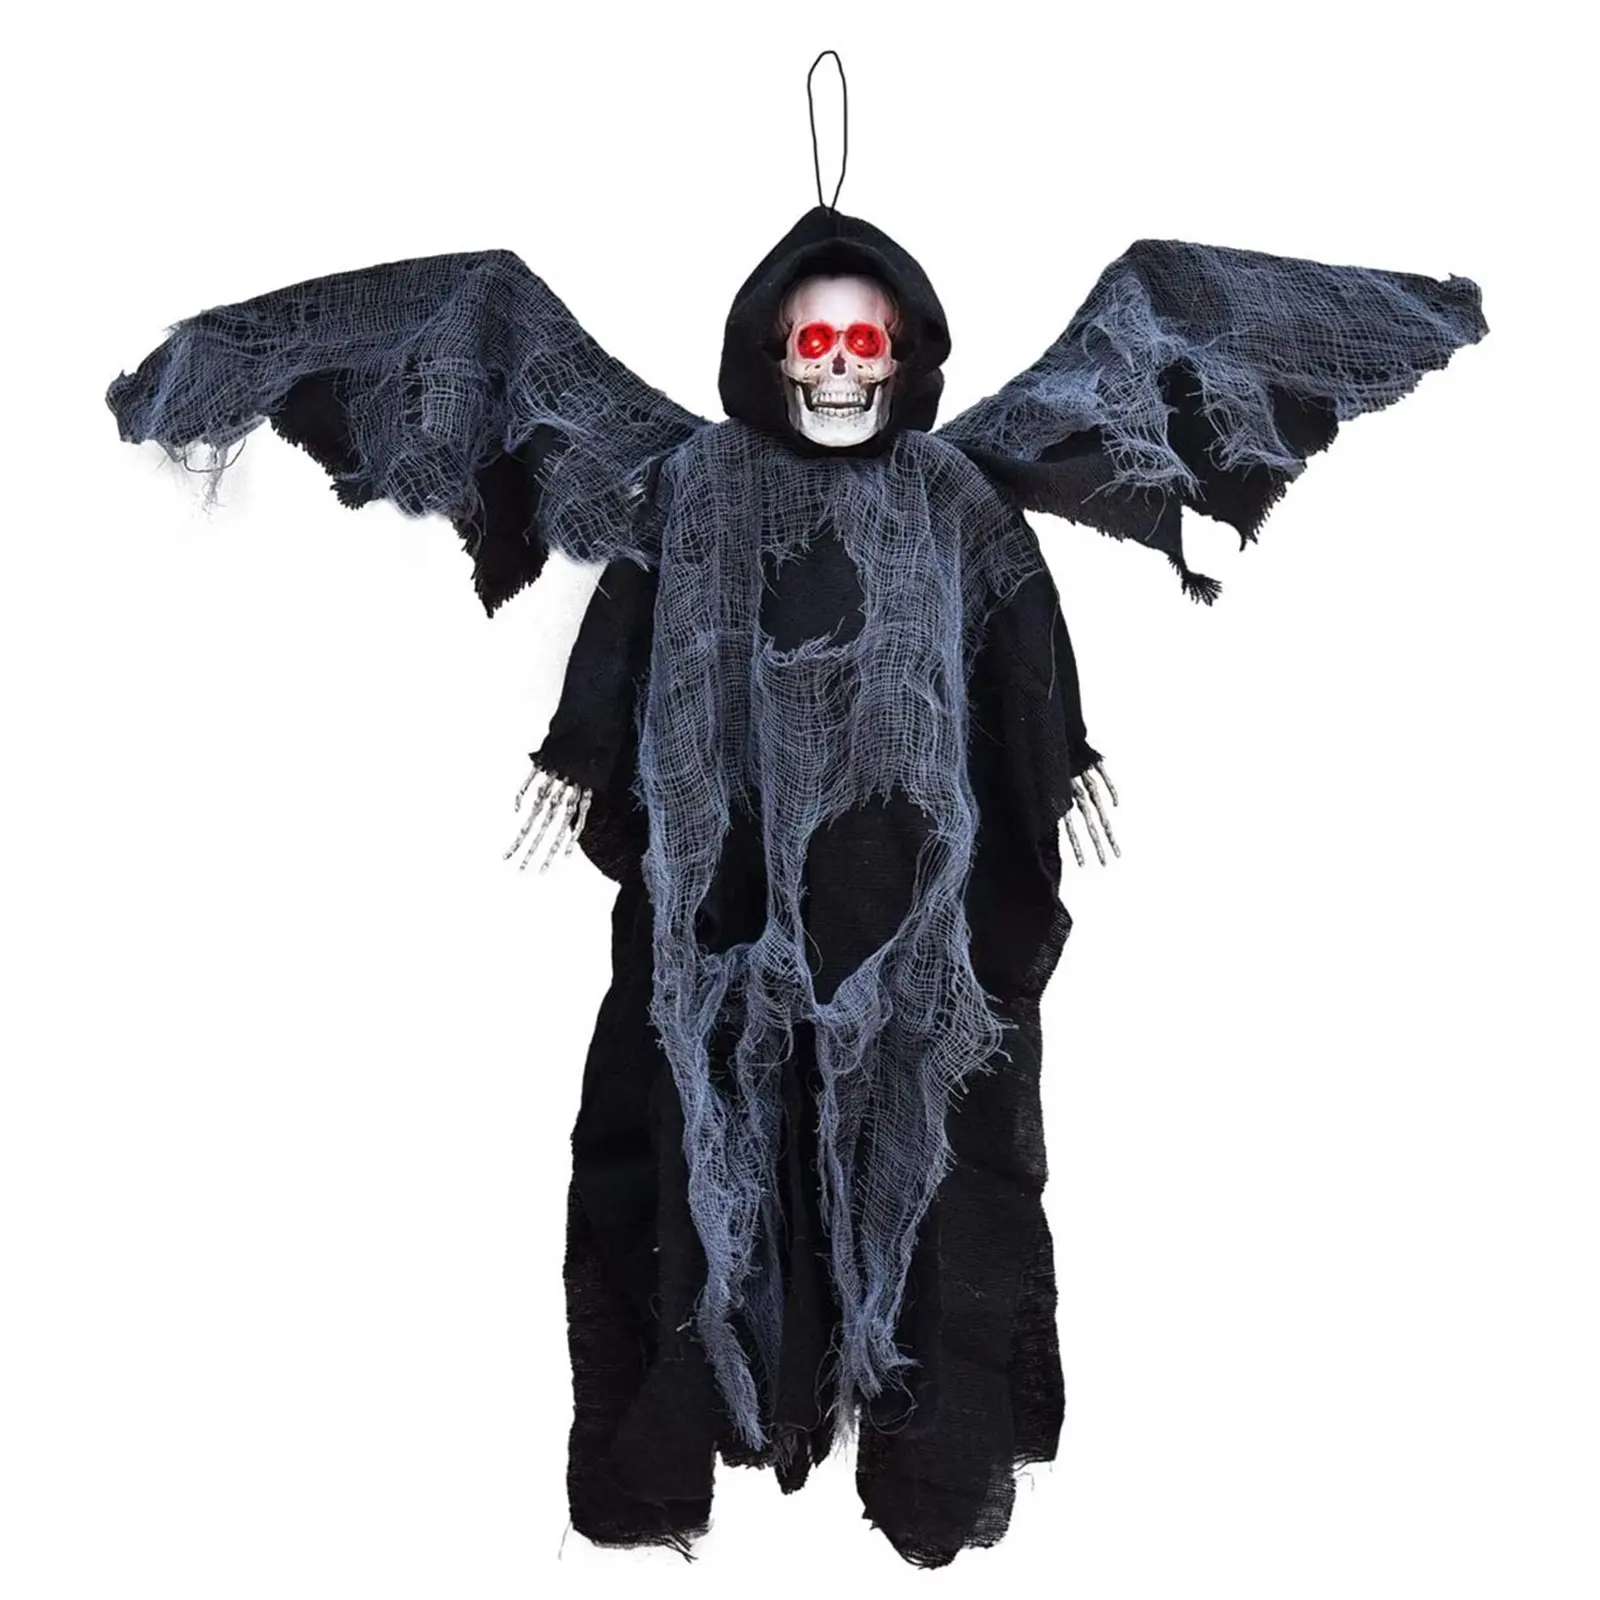 HALLOWEEN DECOR 18" Animated Hanging Black Reaper with Wings Halloween Animatronic Haunted House PARTY props